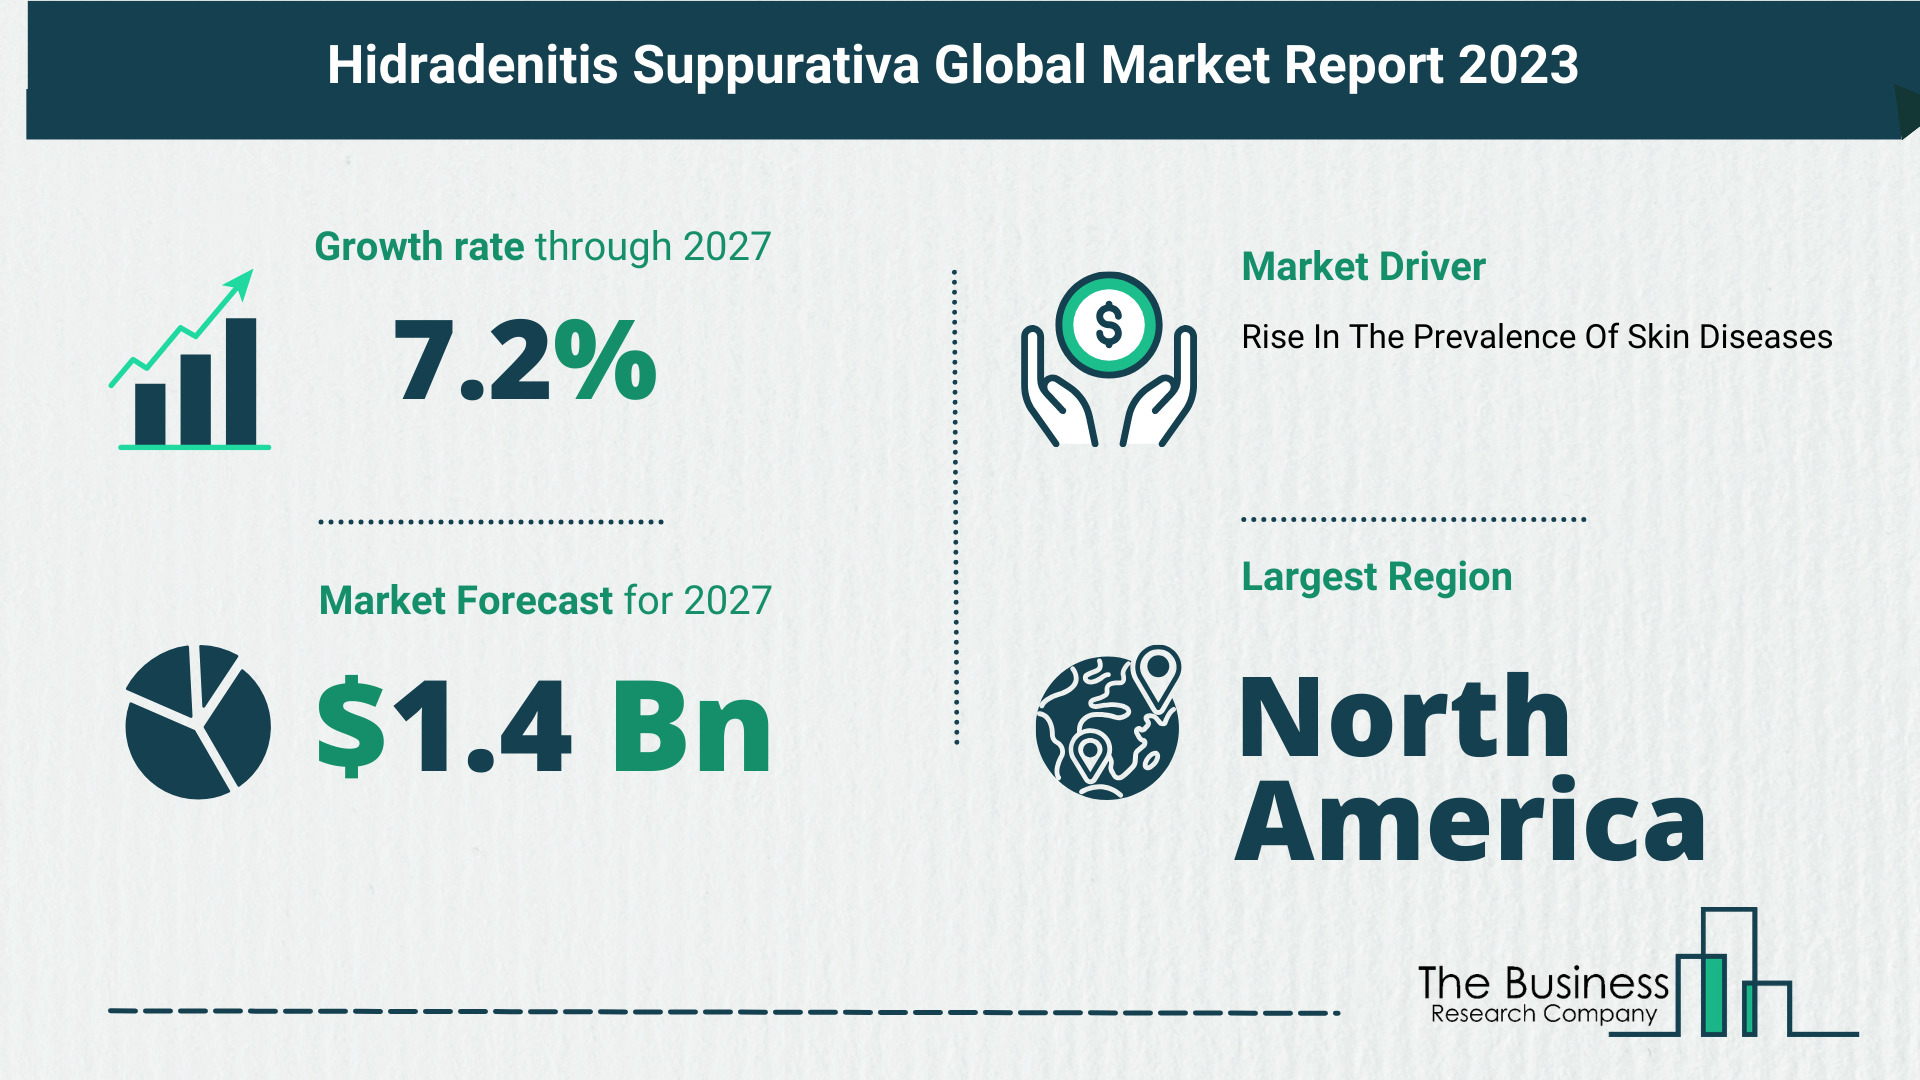 5 Takeaways From The Hidradenitis Suppurativa Market Overview 2023